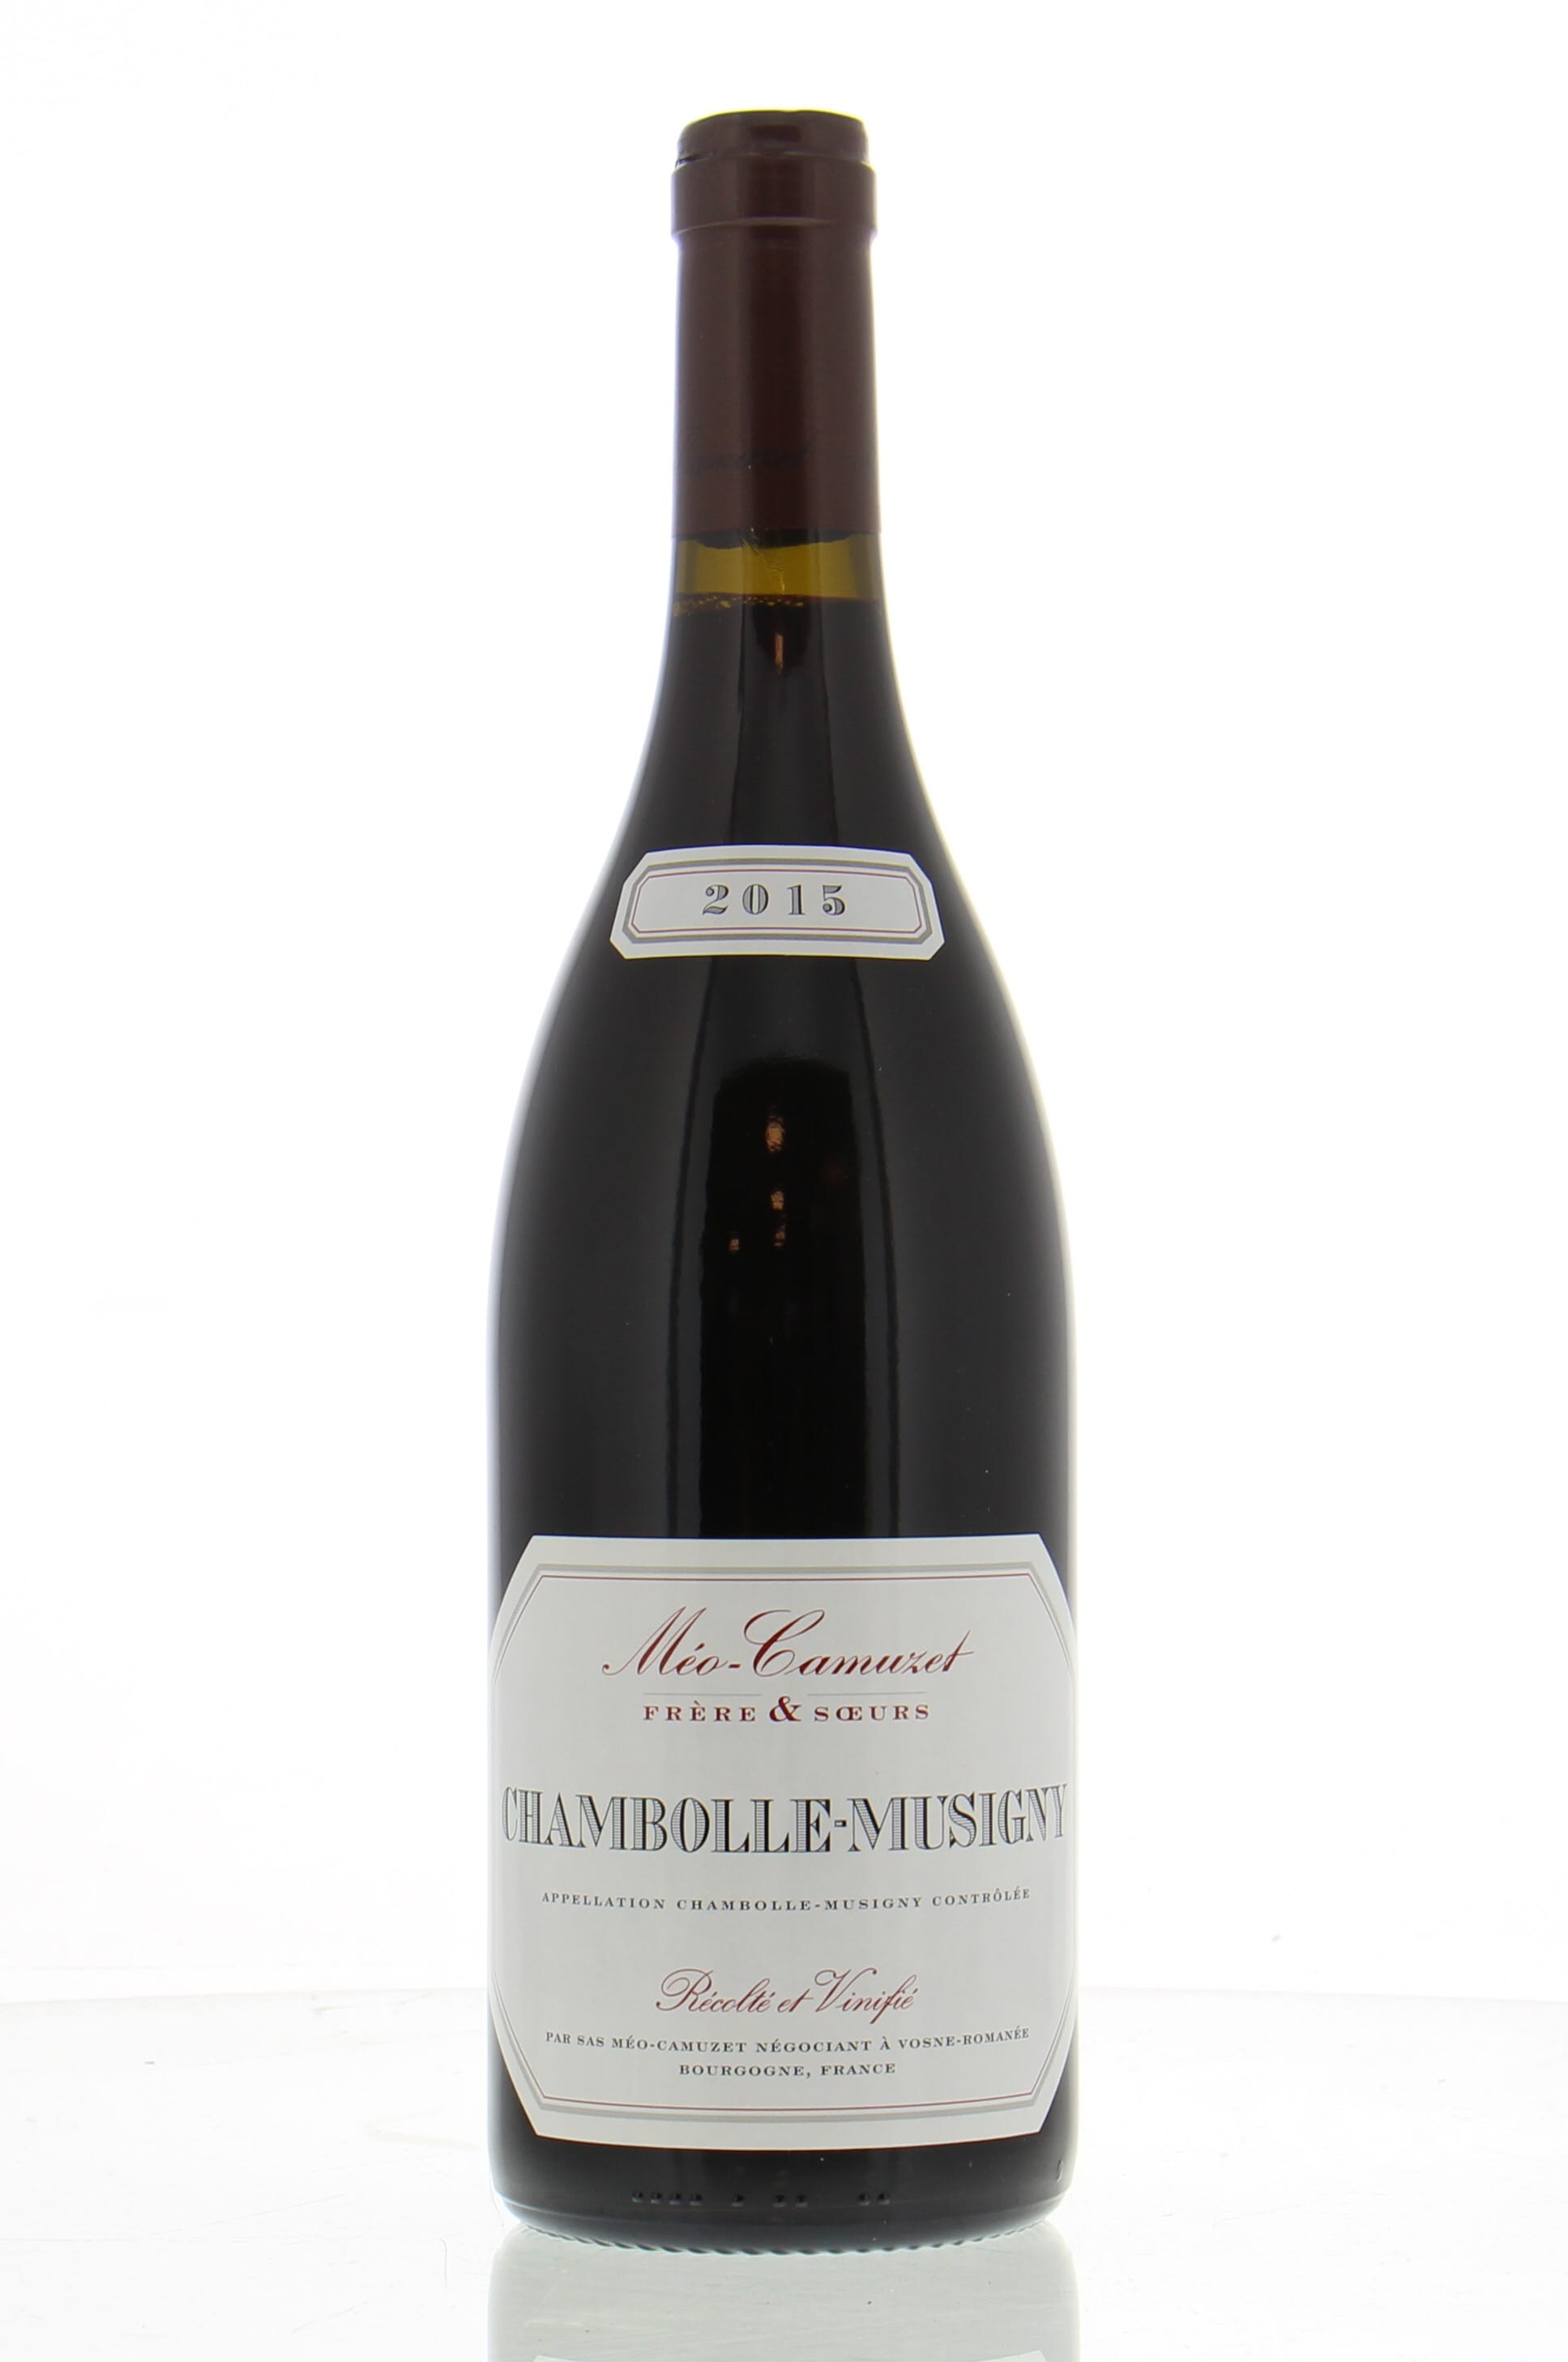 Meo Camuzet - Chambolle Musigny 2015 Perfect